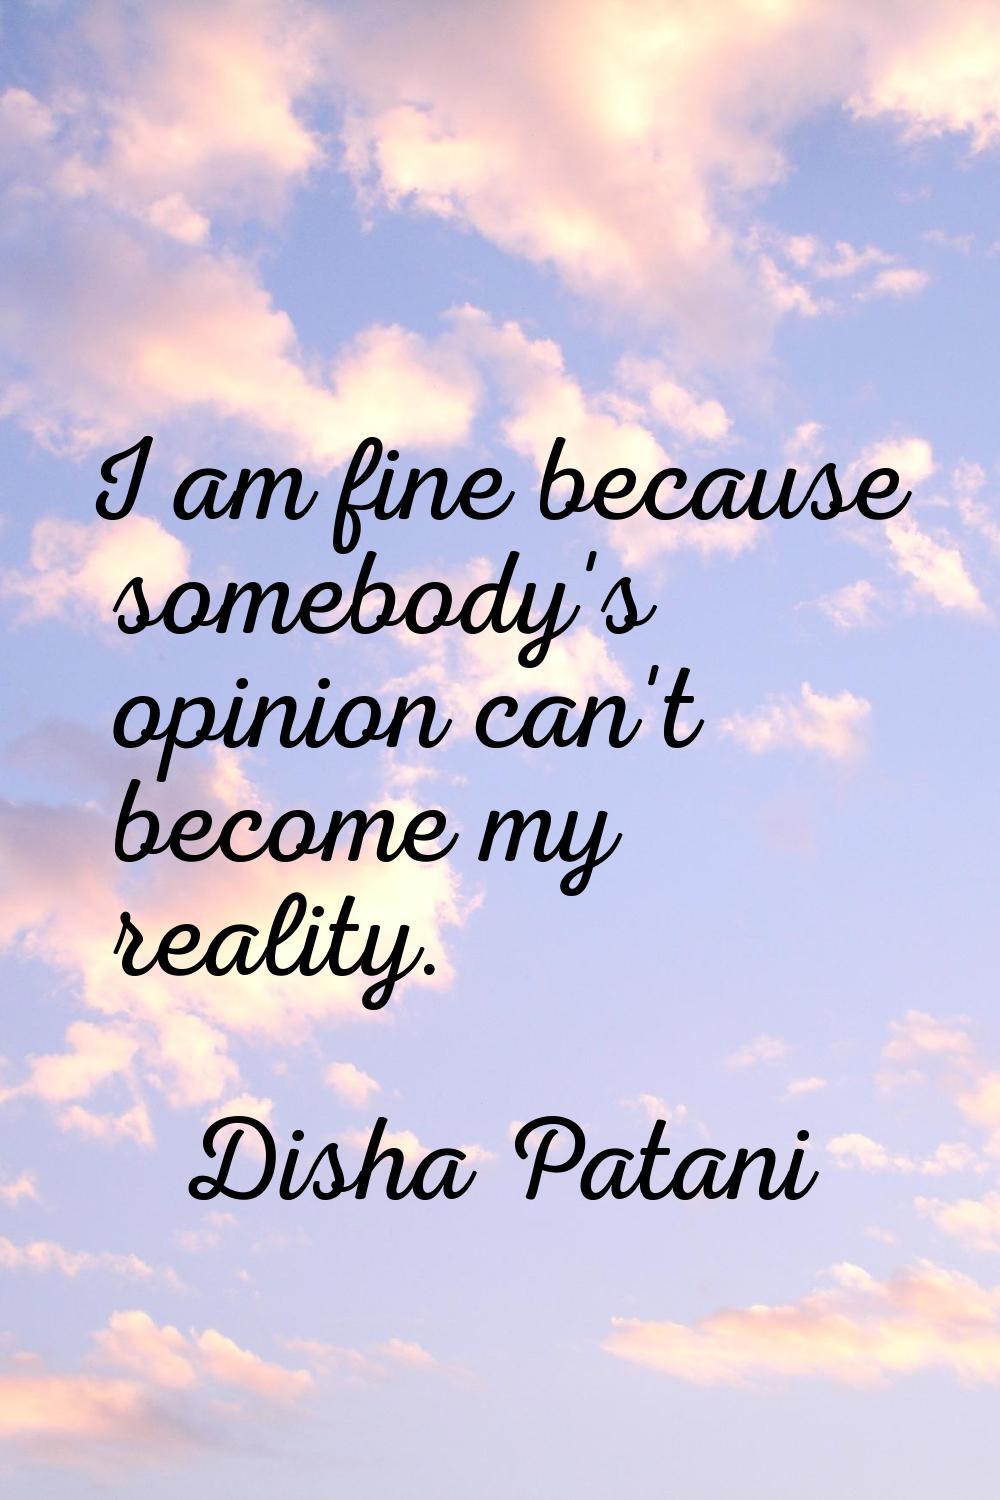 I am fine because somebody's opinion can't become my reality.